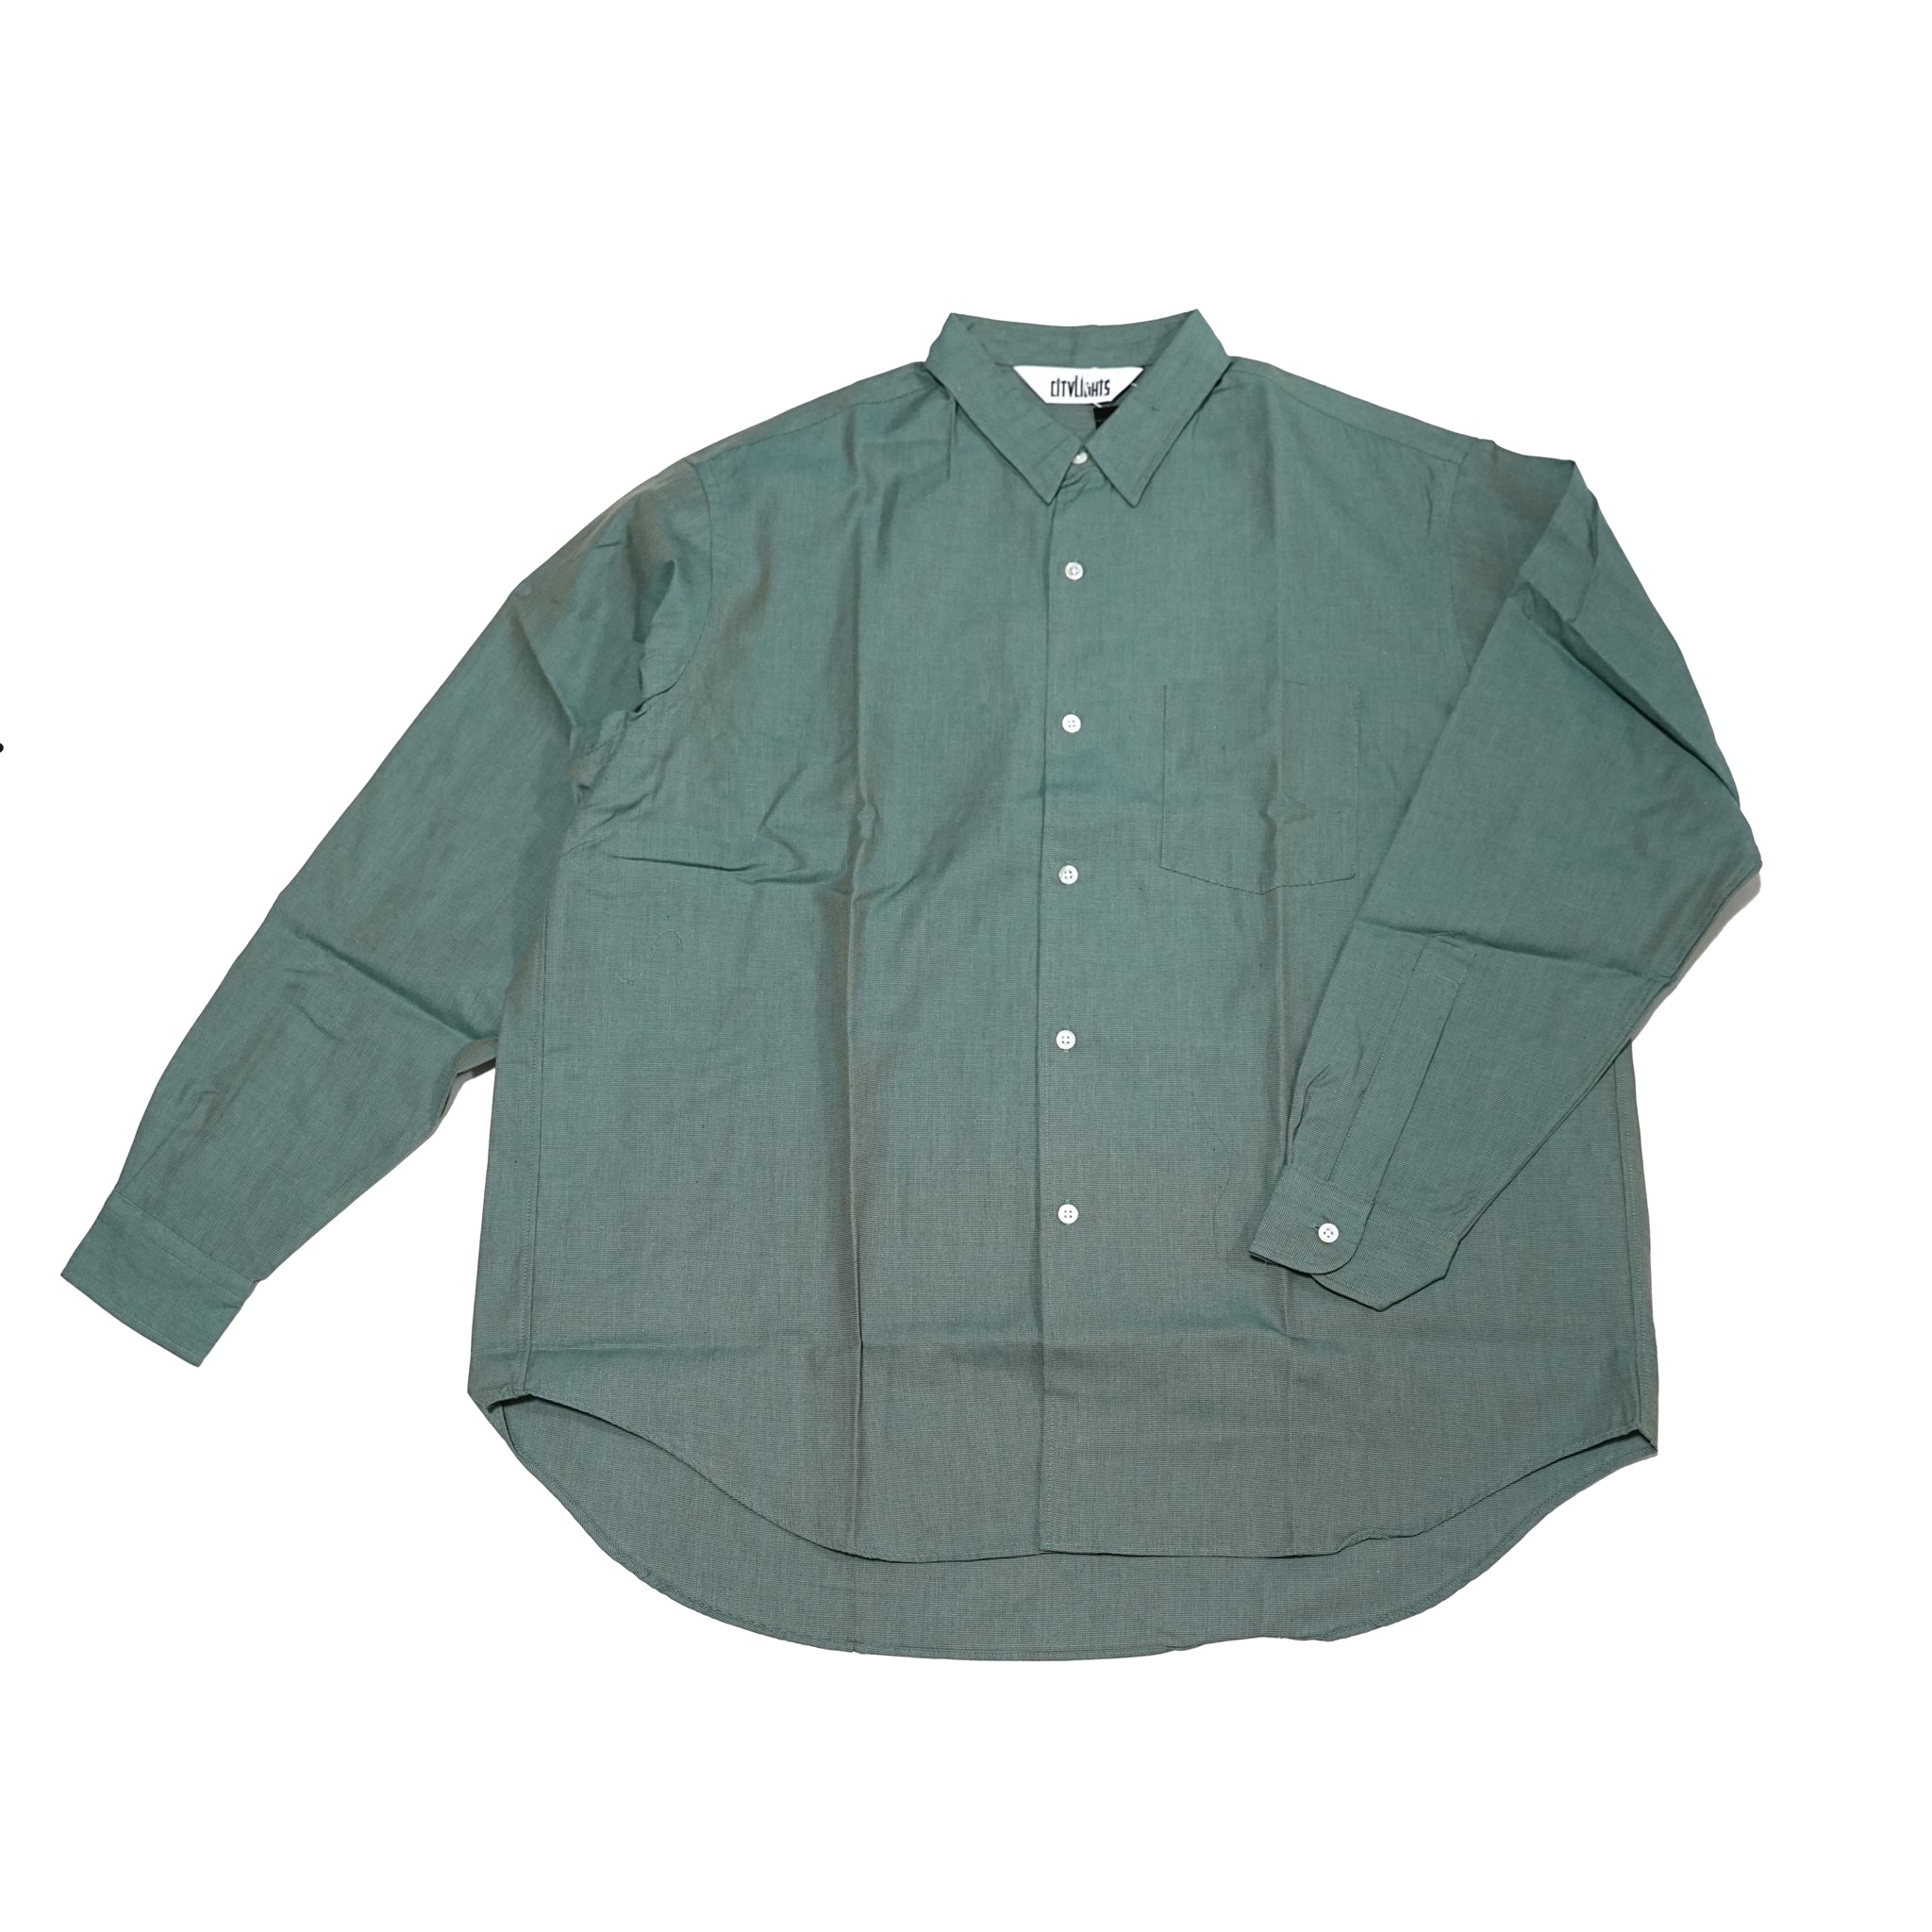 Name: OG REG SHIRTS | Color: Green | Size : Regular/Tall 【CITYLIGHTS PRODUCTS_シティライツプロダクツ】